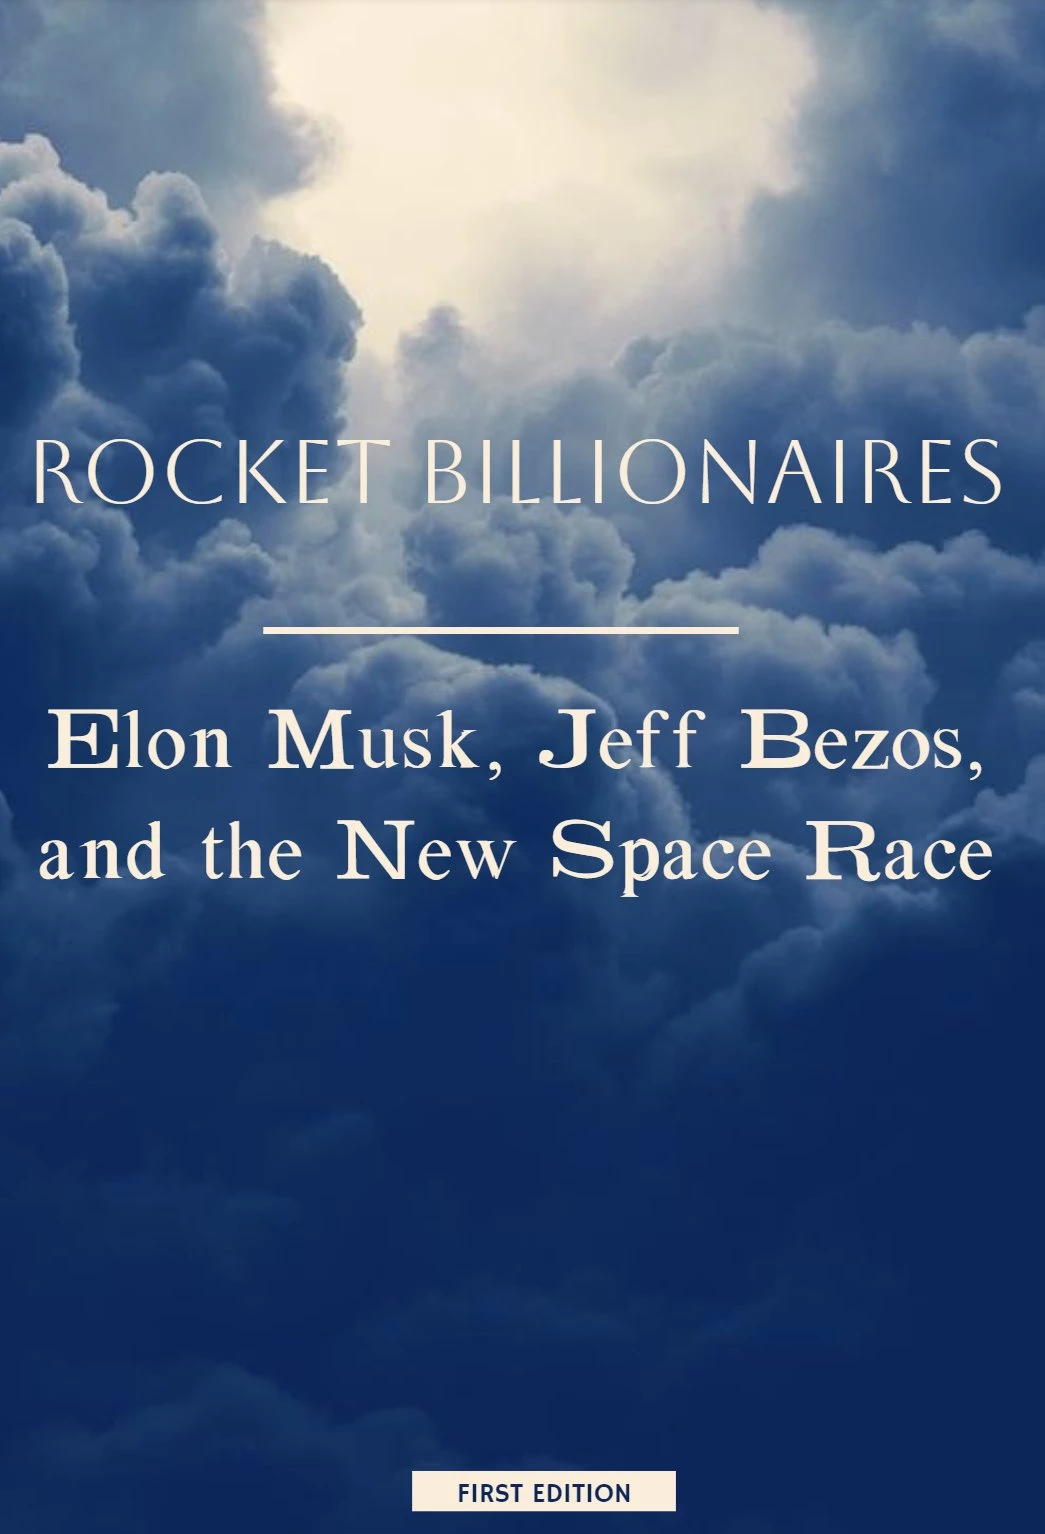 Review of the book “Rocket Billionaires: Elon Musk, Jeff Bezos, and the New Space Race”